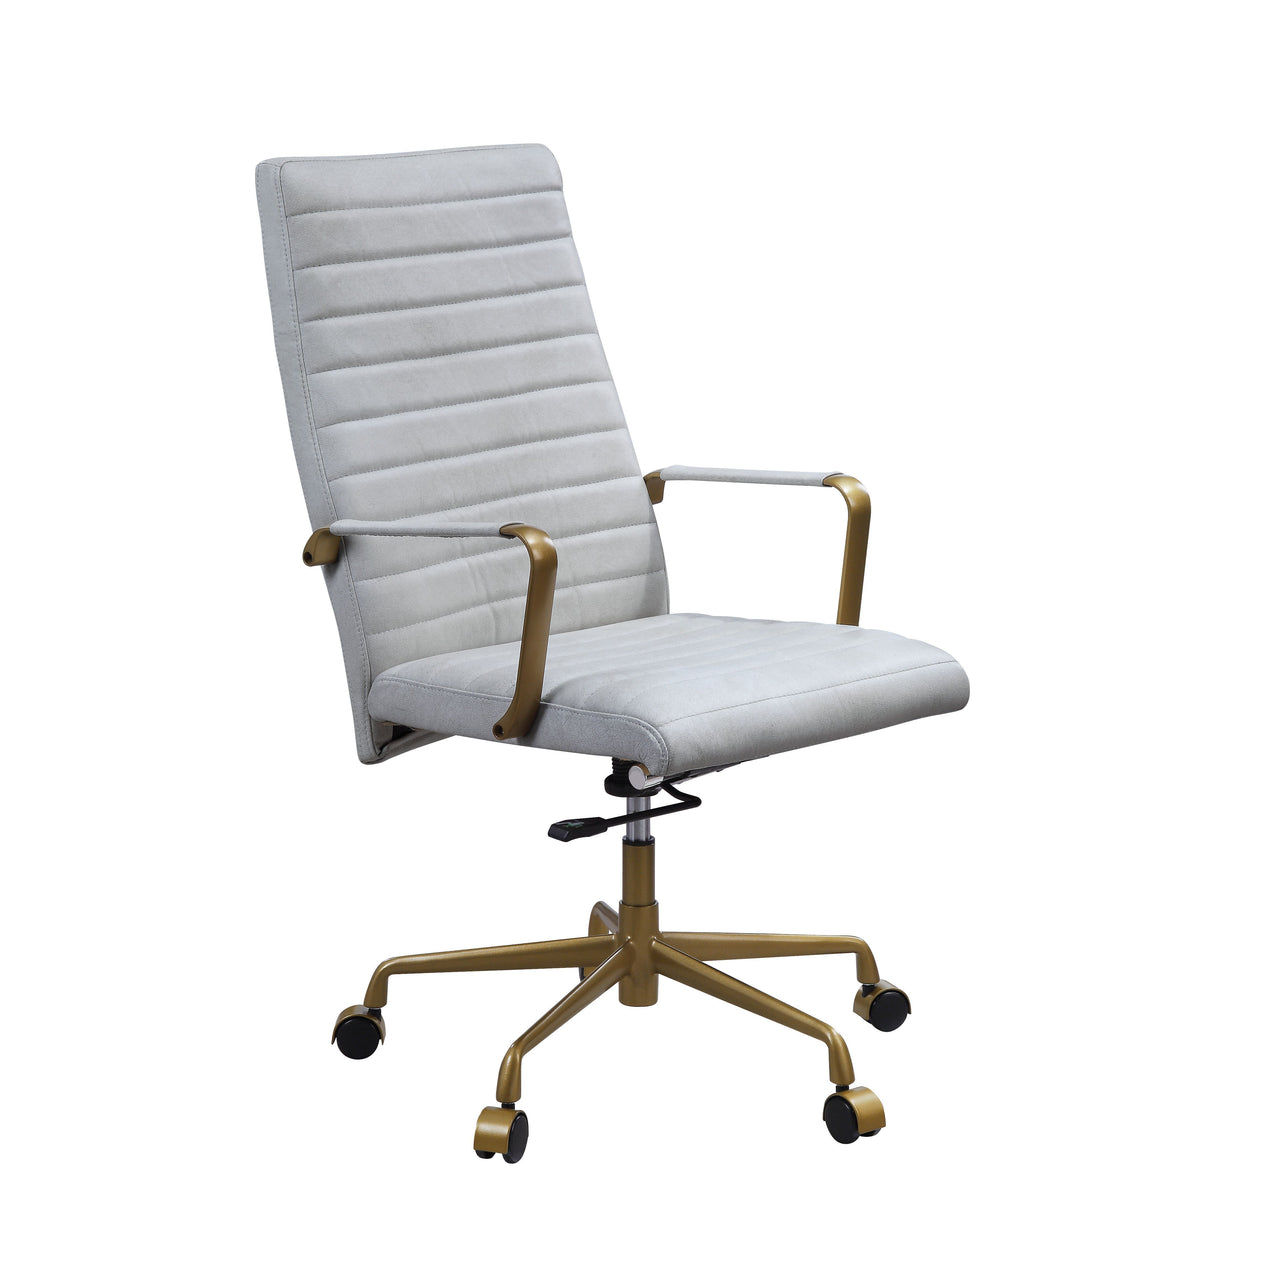 Duralo - Office Chair - Tony's Home Furnishings